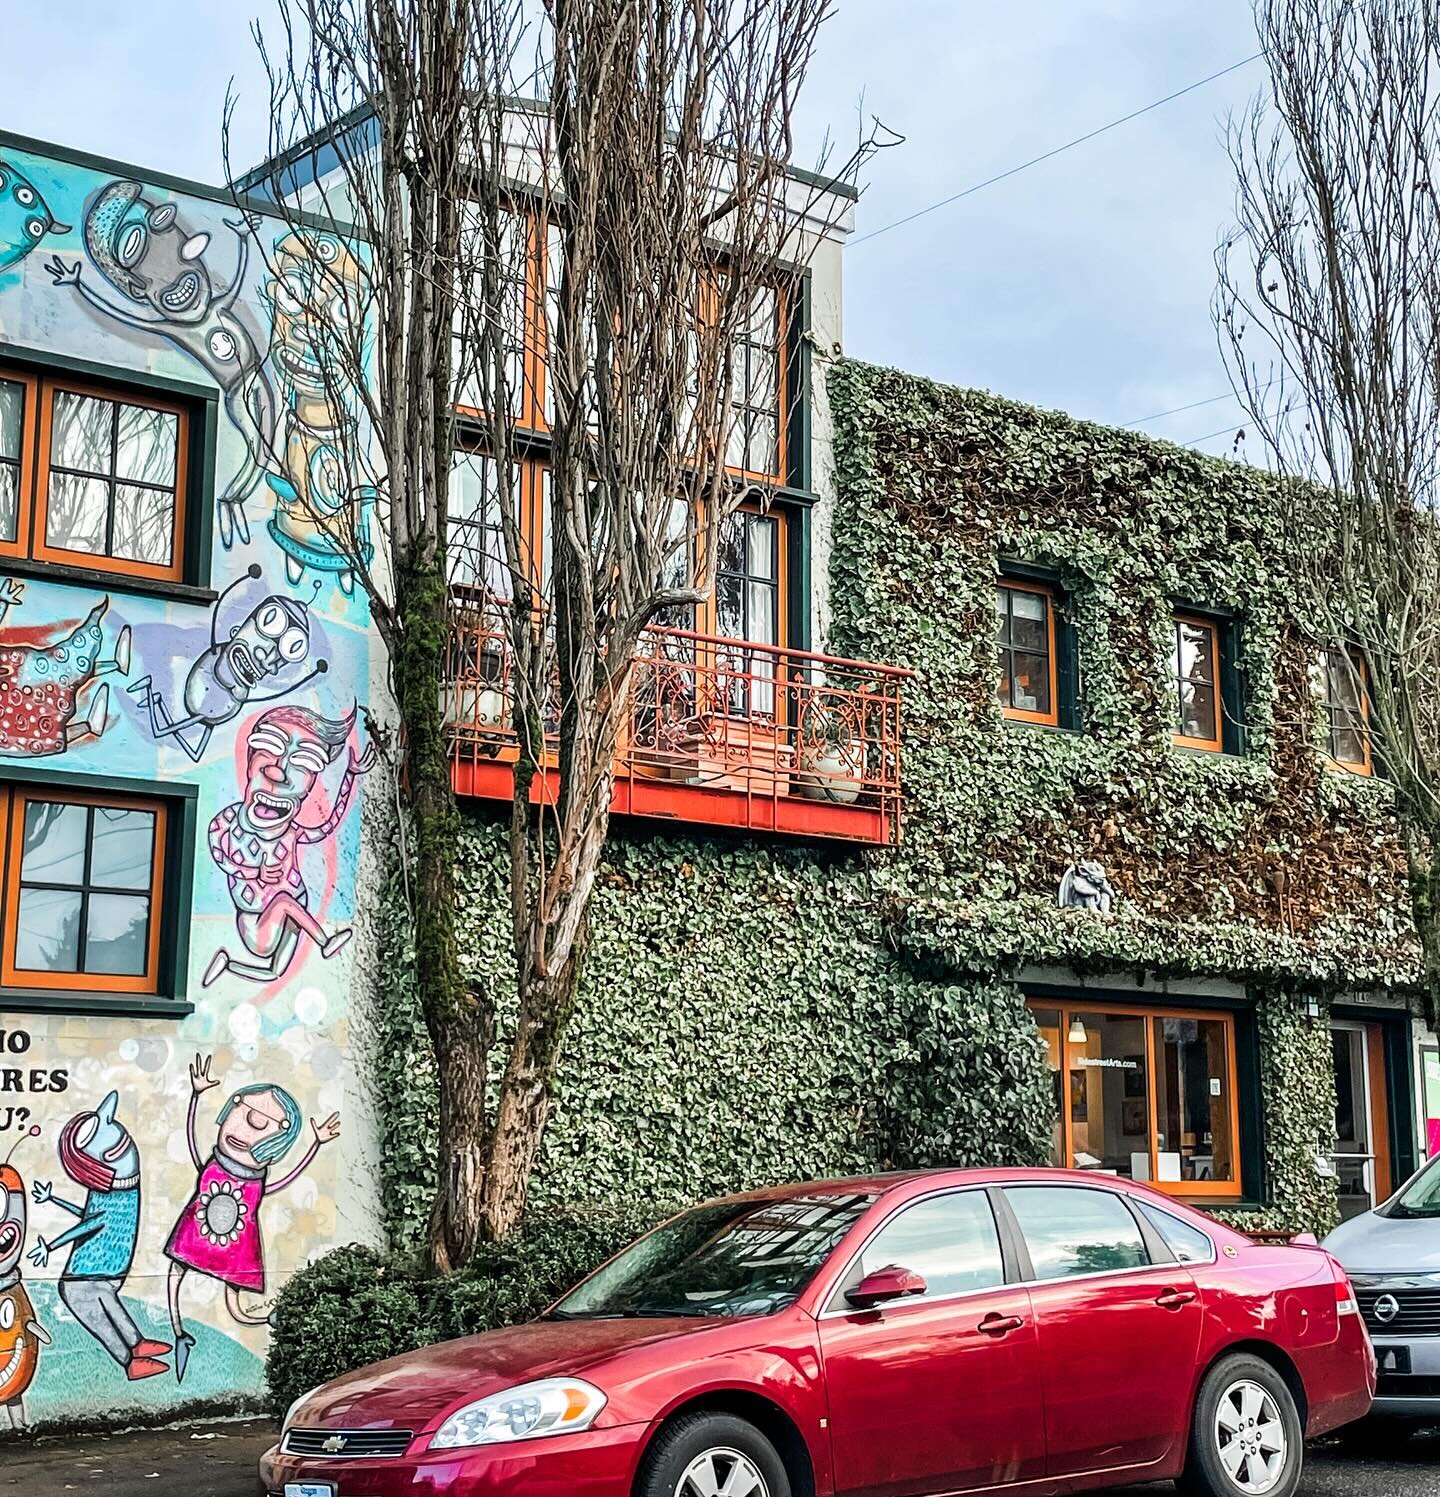 The vine growth on this building was so stunning it stopped me in my tracks! Exploring our new city is making me feel at home 😊 #exploreportland #pnwonderland #kindredrealtypnw